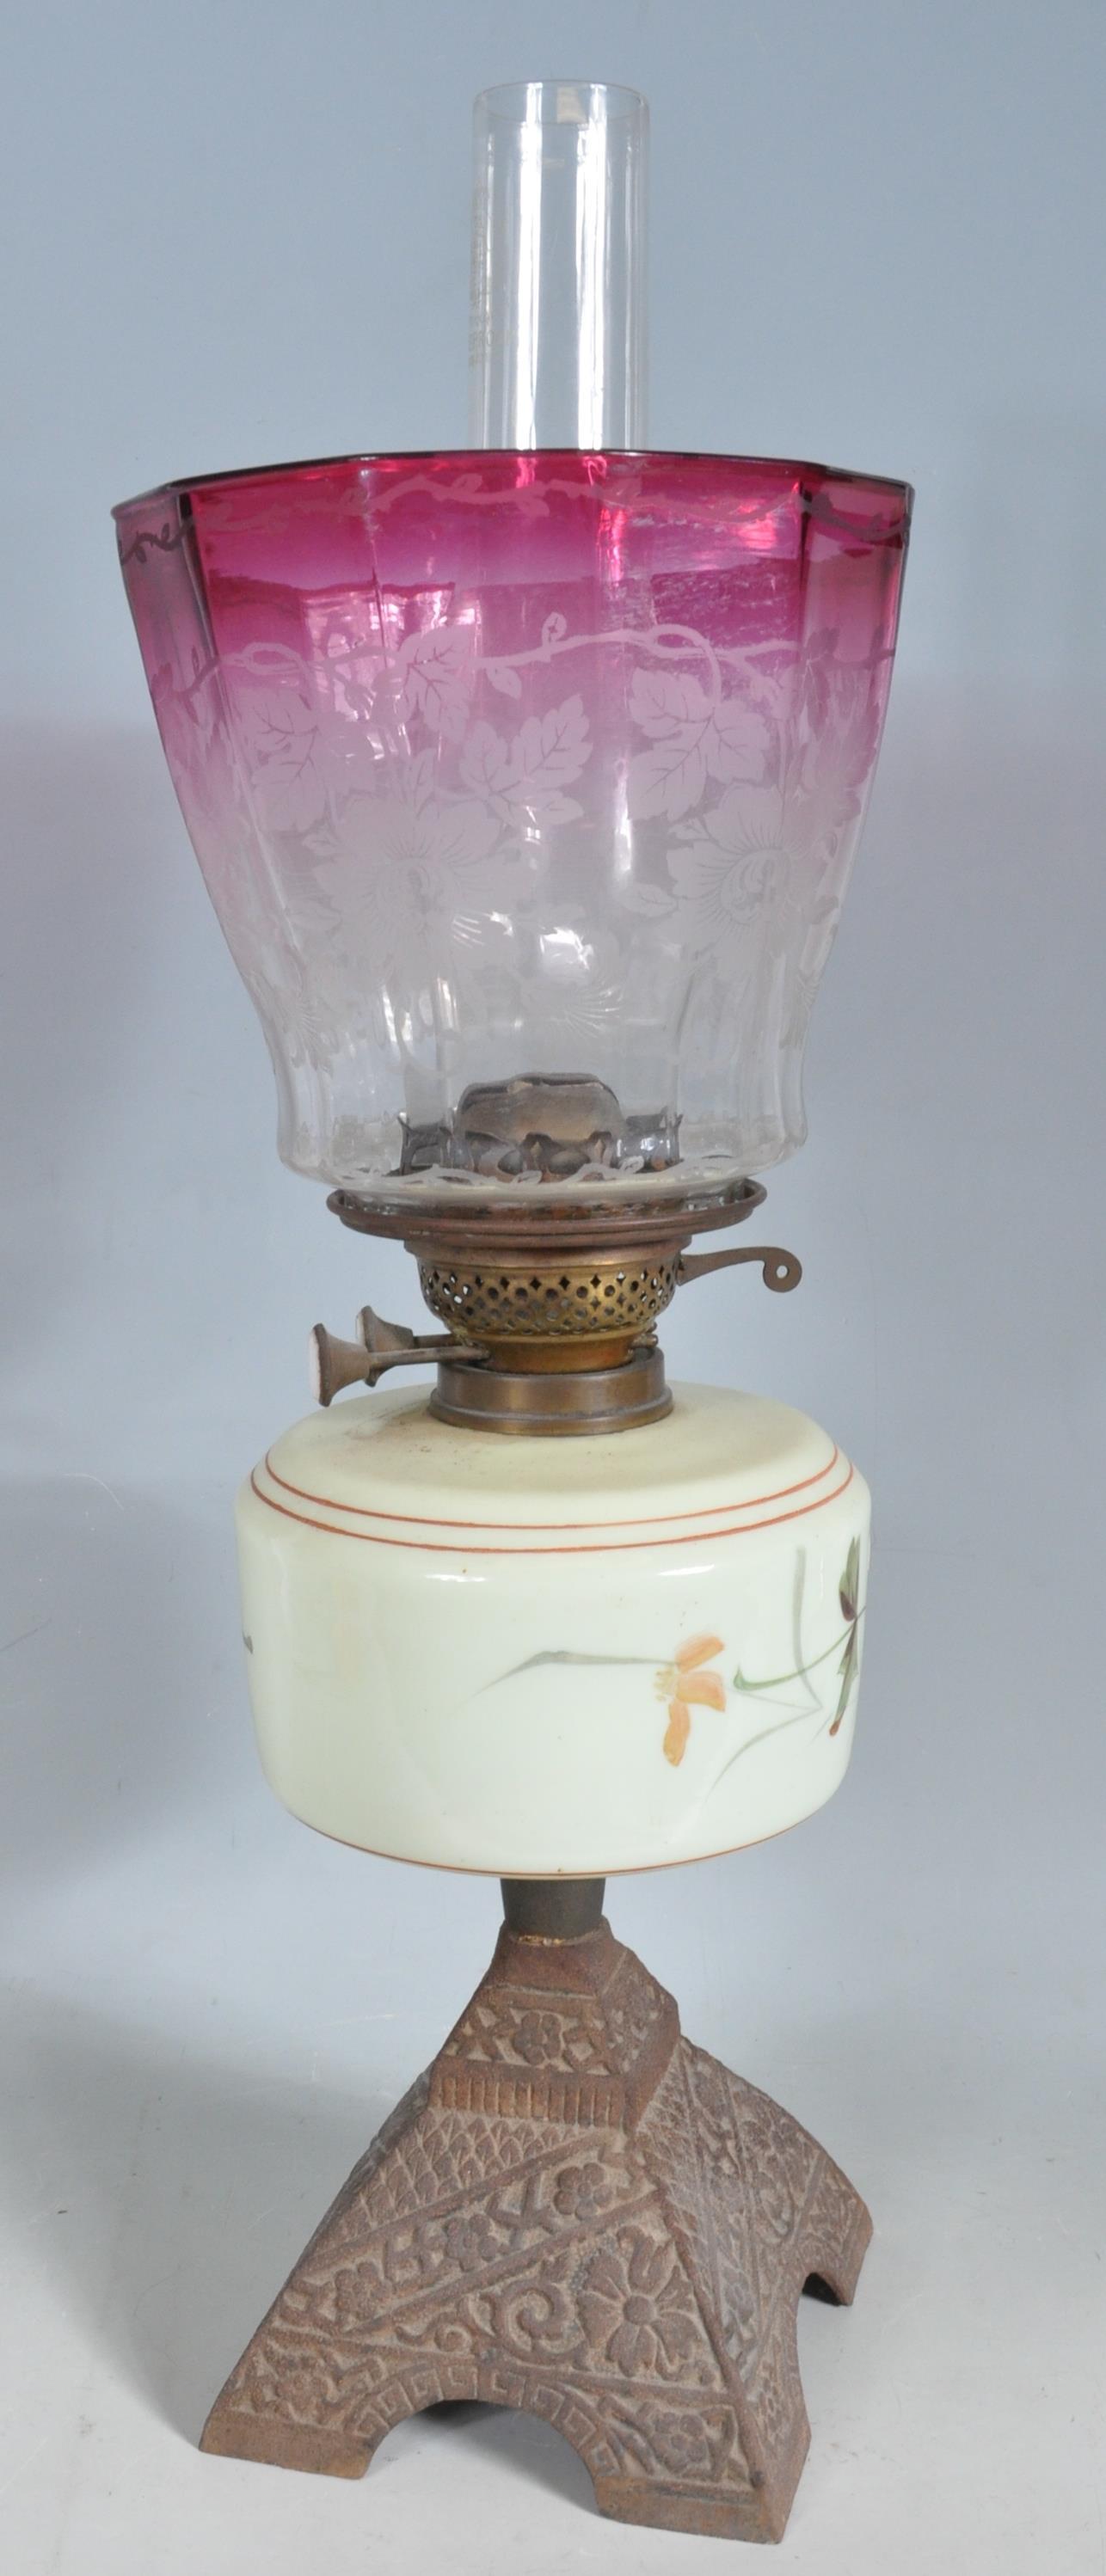 LATE 19TH CENTURY VICTORIAN CRANBERRY GLASS OIL LAMP - Image 7 of 8